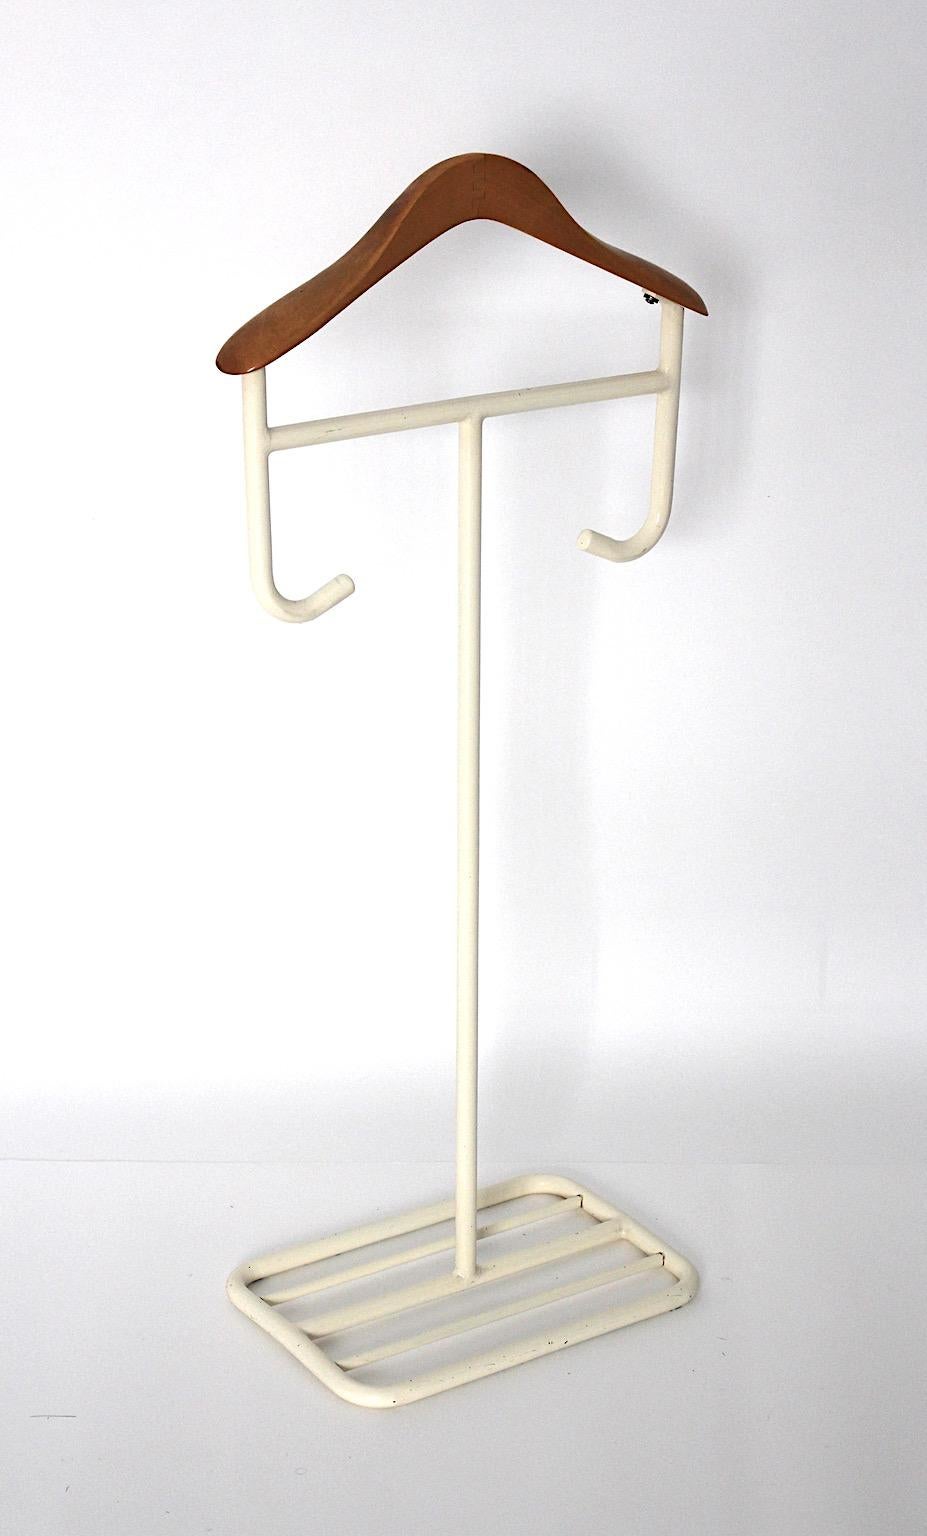 Lacquered White Metal Beech Bauhaus Valet Coat Rack circa 1930 Germany For Sale